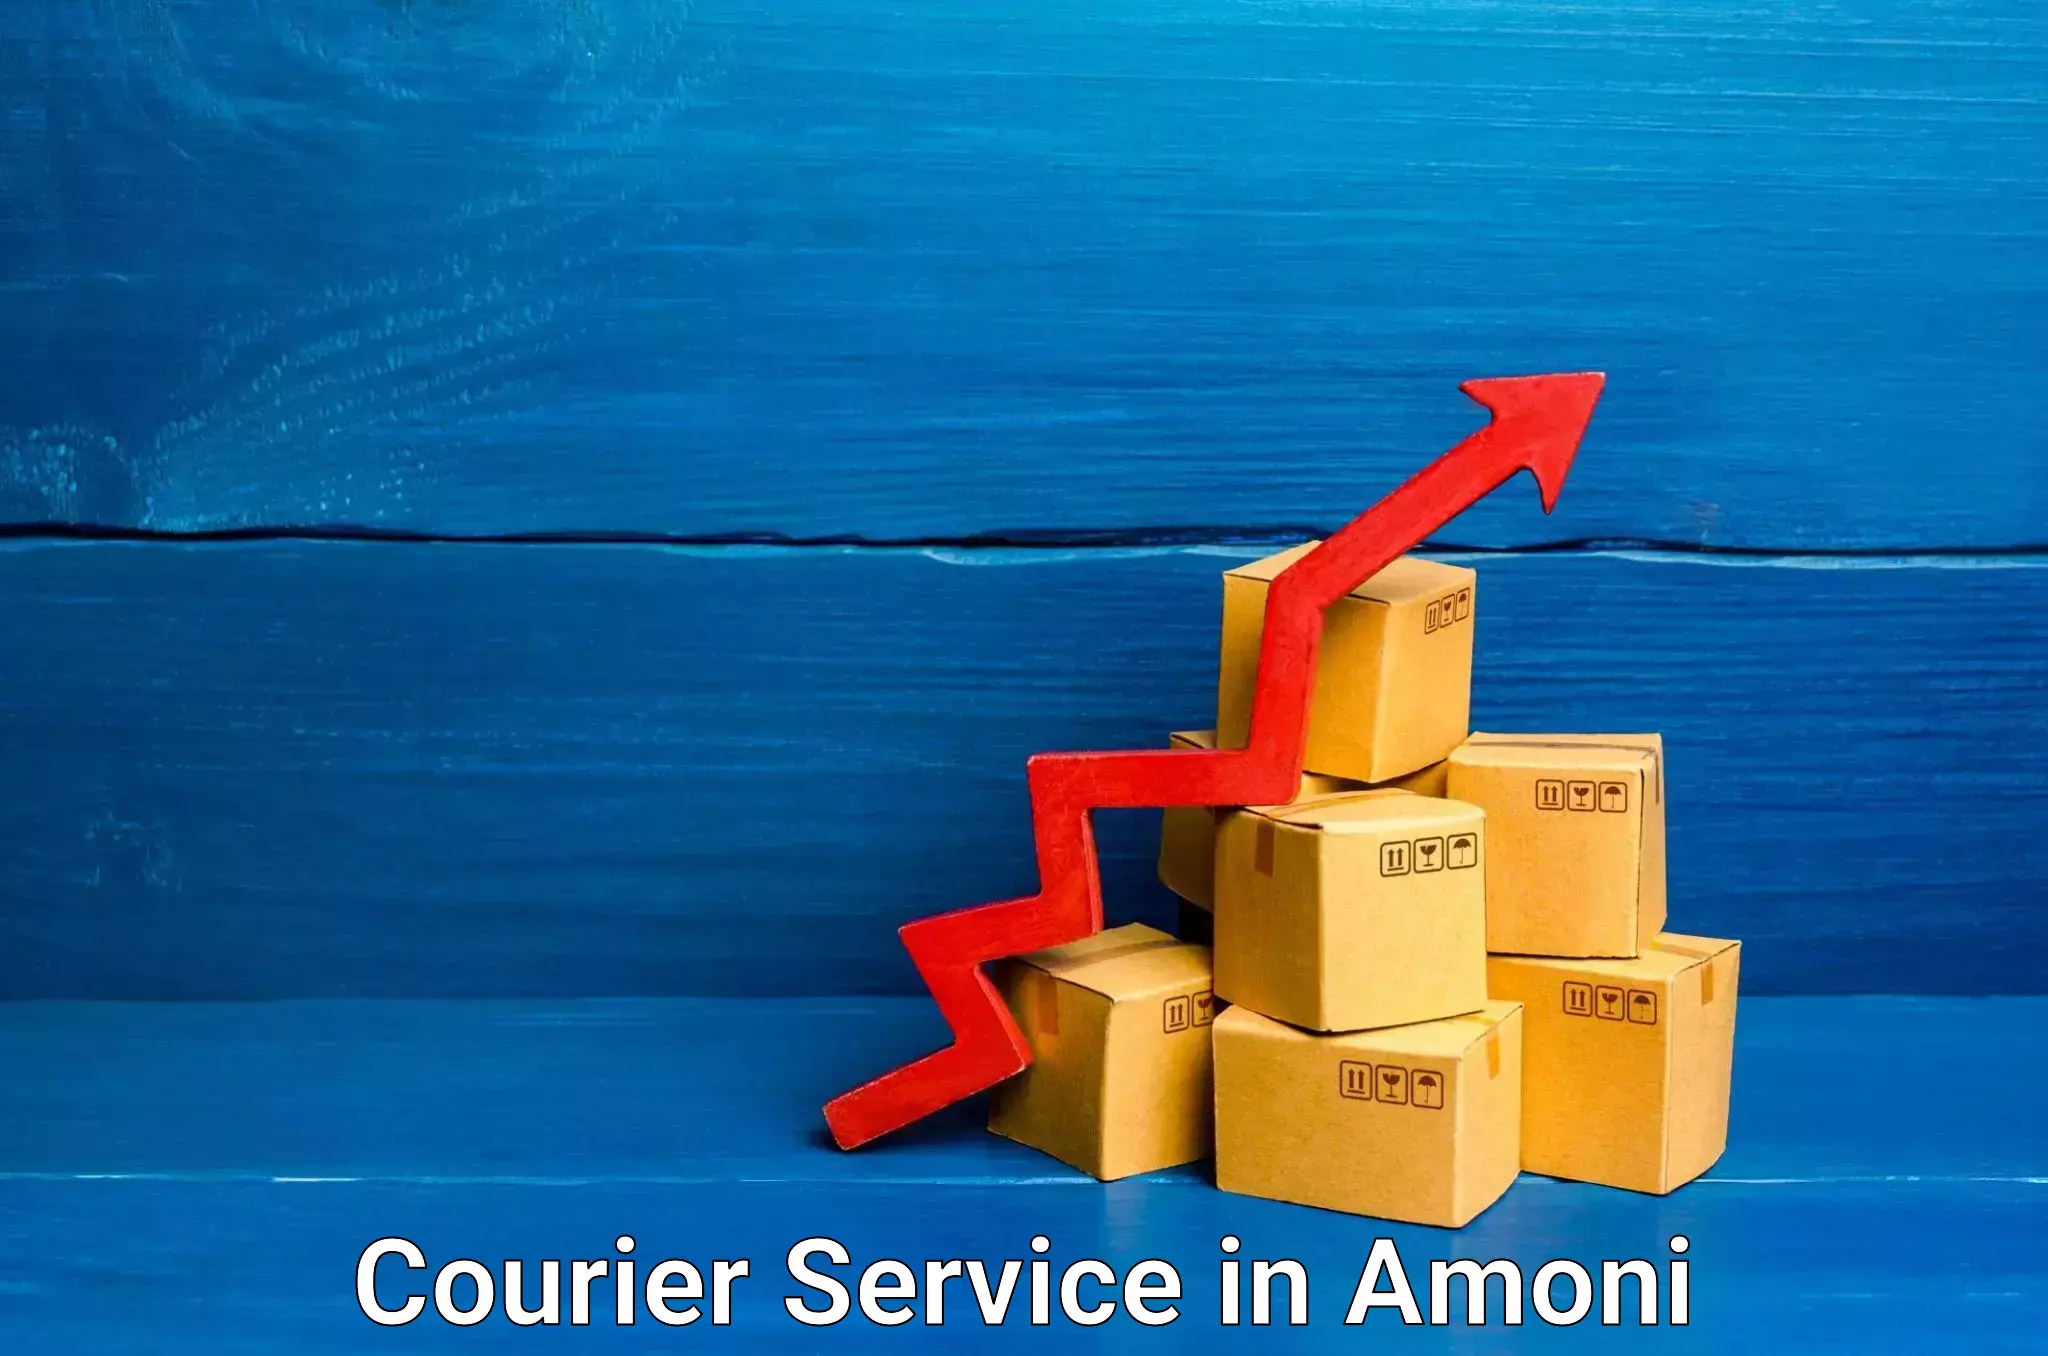 Specialized courier services in Amoni